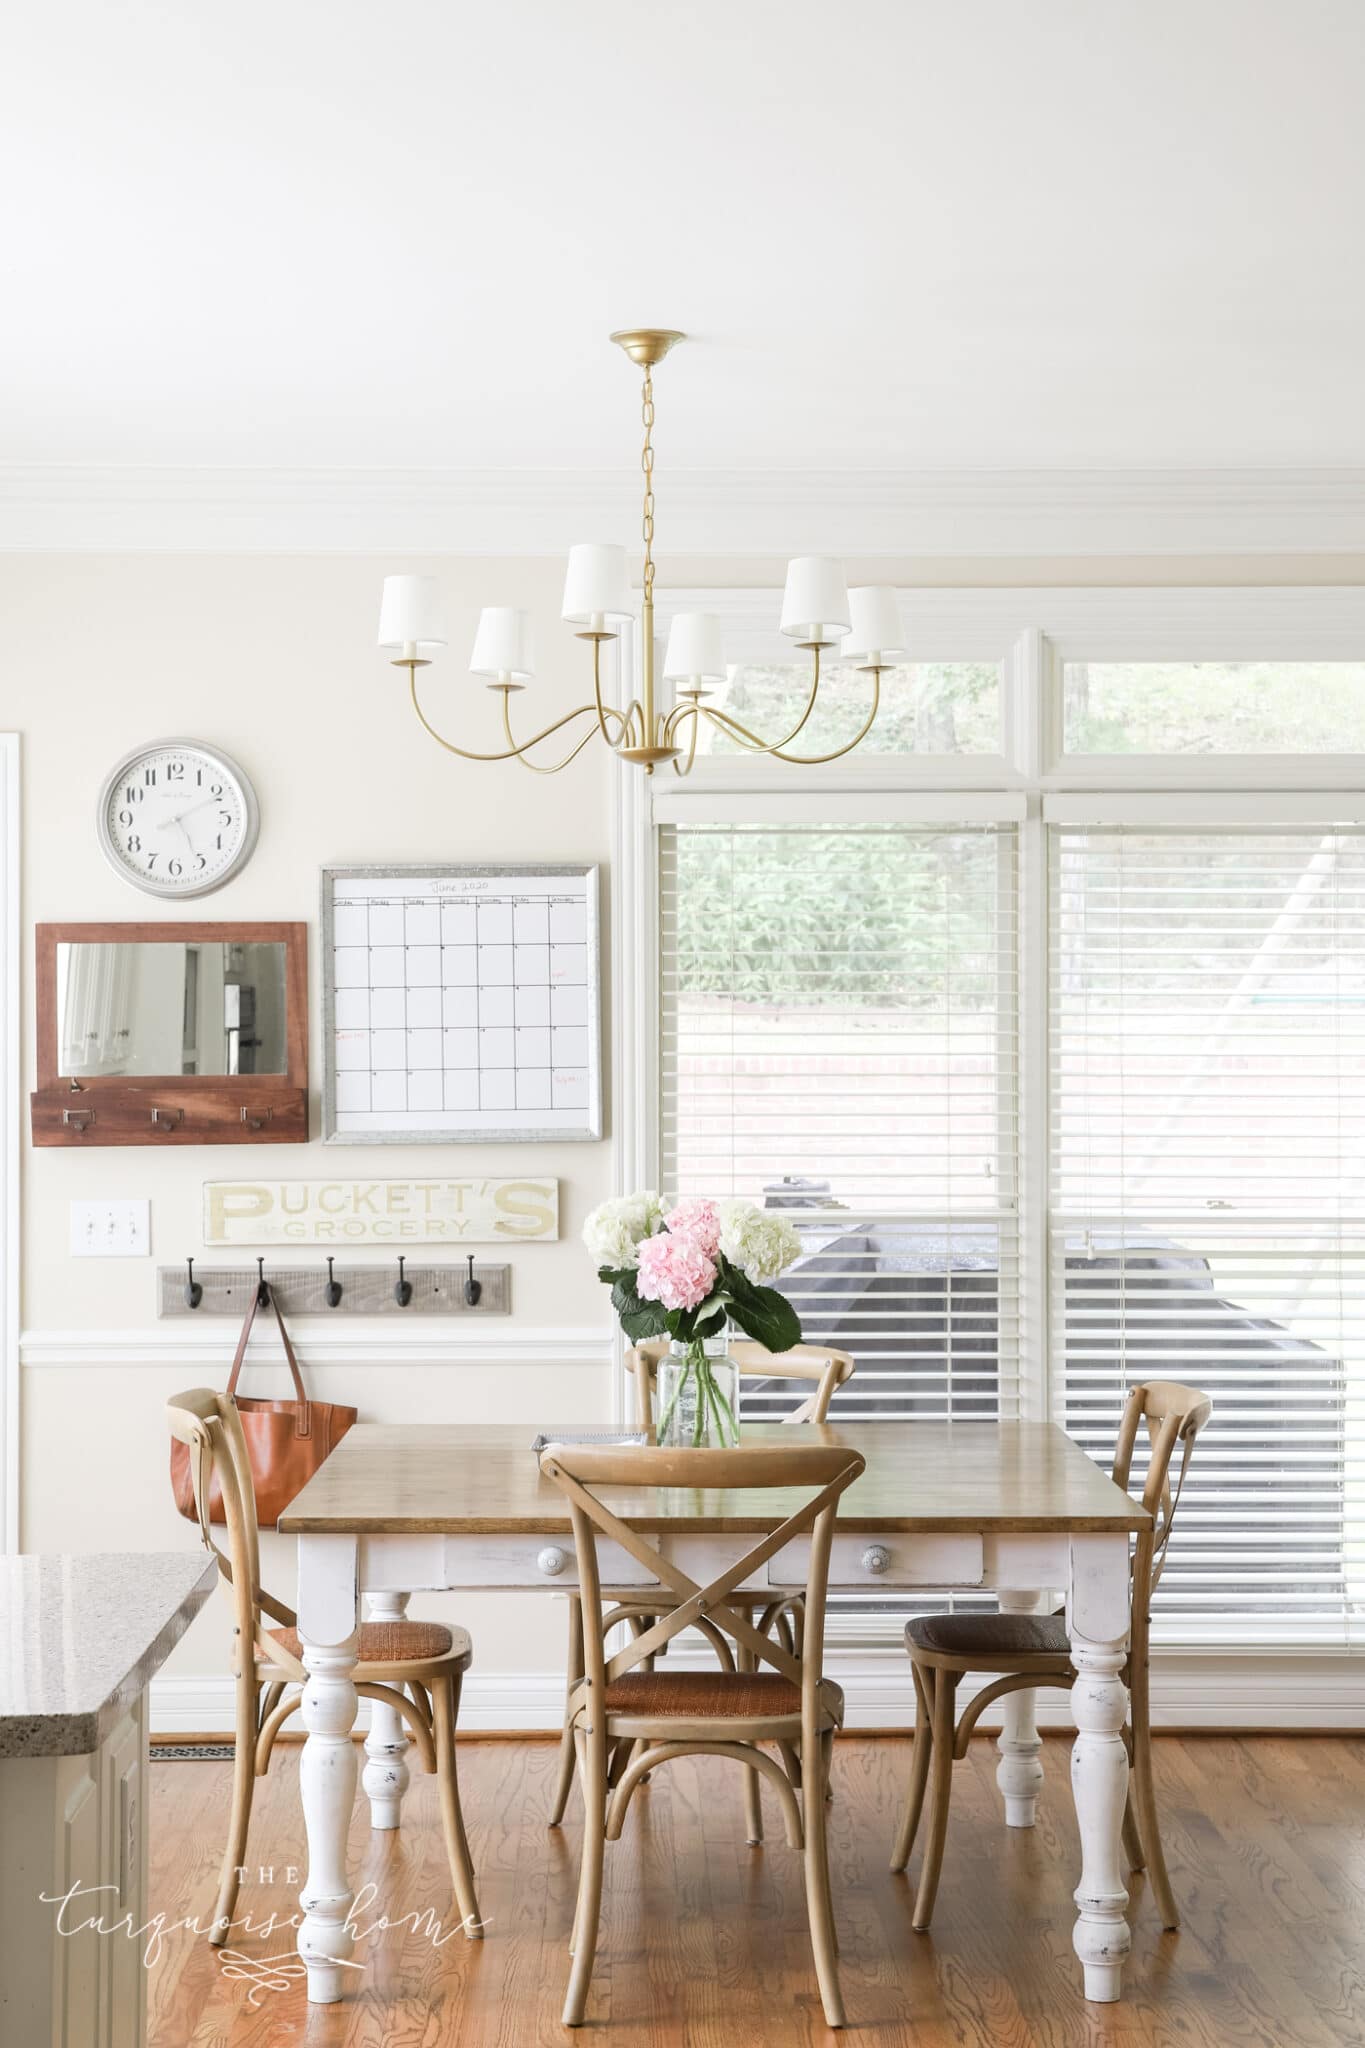 Traditional Brass Chandelier in the Kitchen